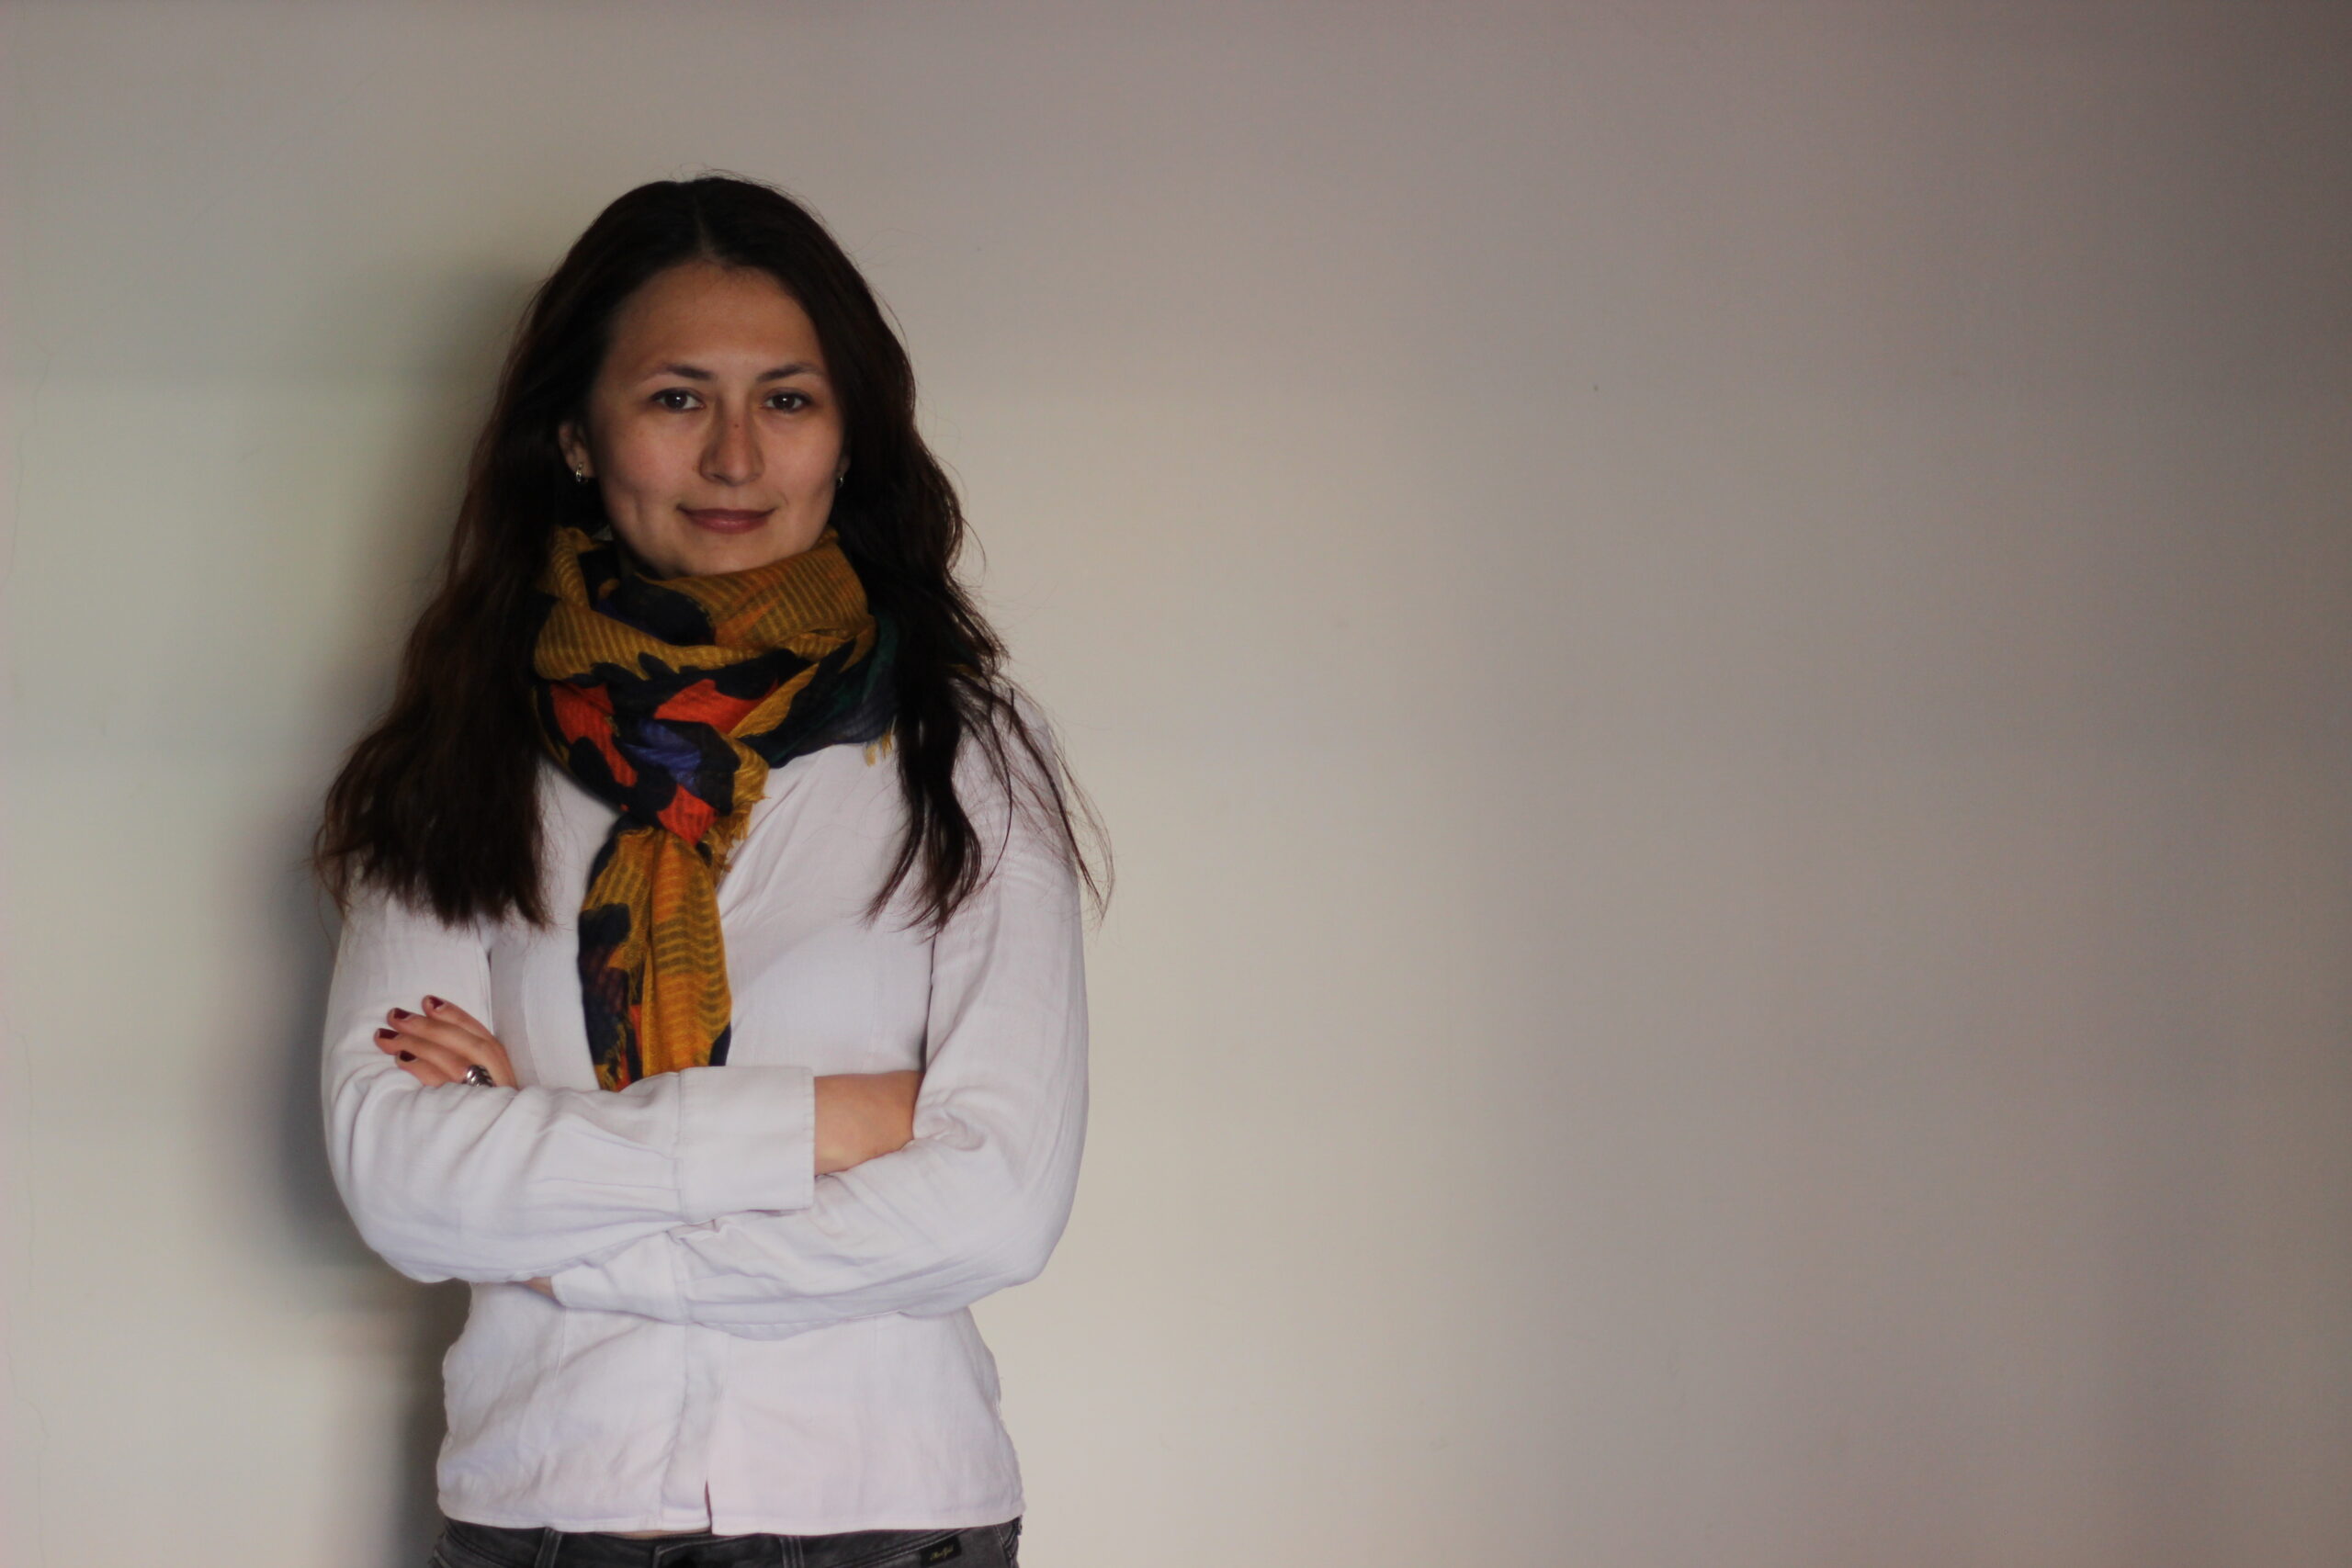 Öznur Karakas new postdoc in the project “The Future is Now: Gender Mainstreaming as eSSENCE”